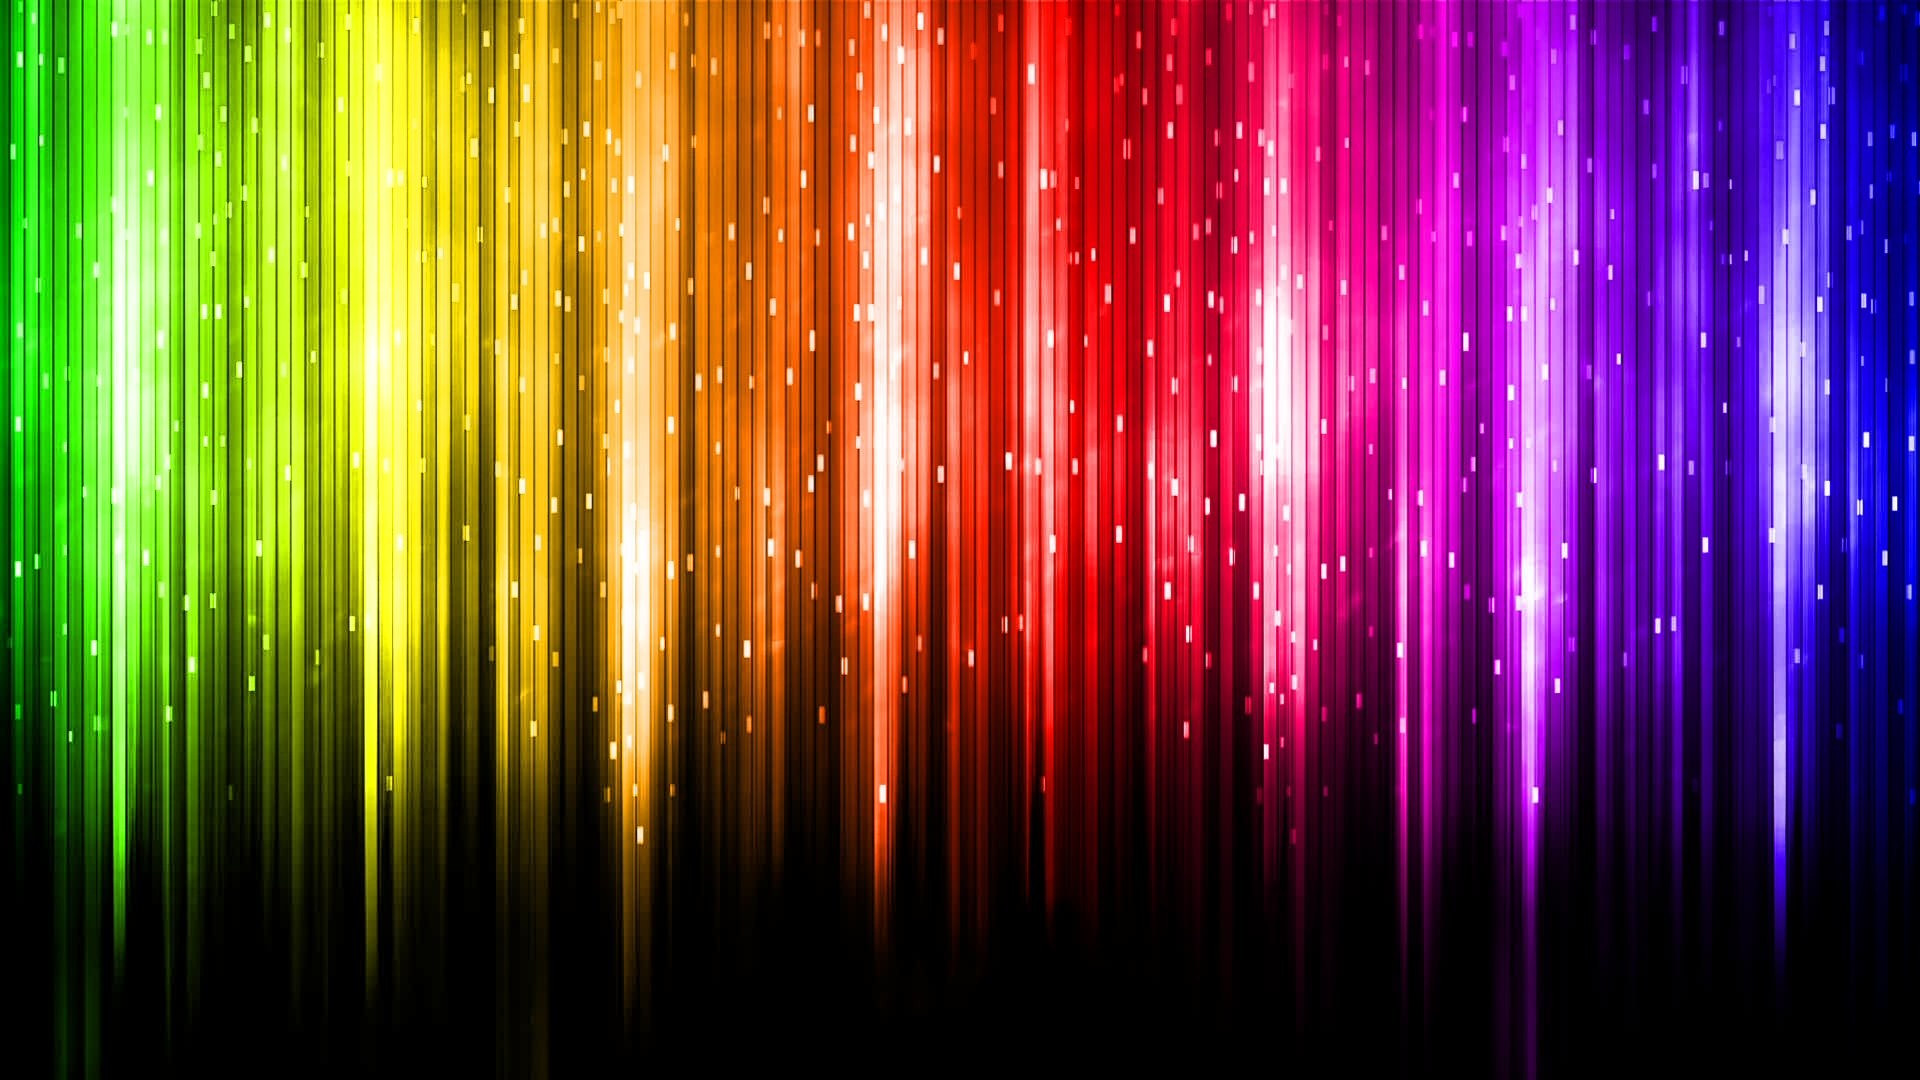 Wallpapers Computer Rainbow Colors With Resolution 1920X1080 pixel. You can make this wallpaper for your Desktop Computer Backgrounds, Mac Wallpapers, Android Lock screen or iPhone Screensavers